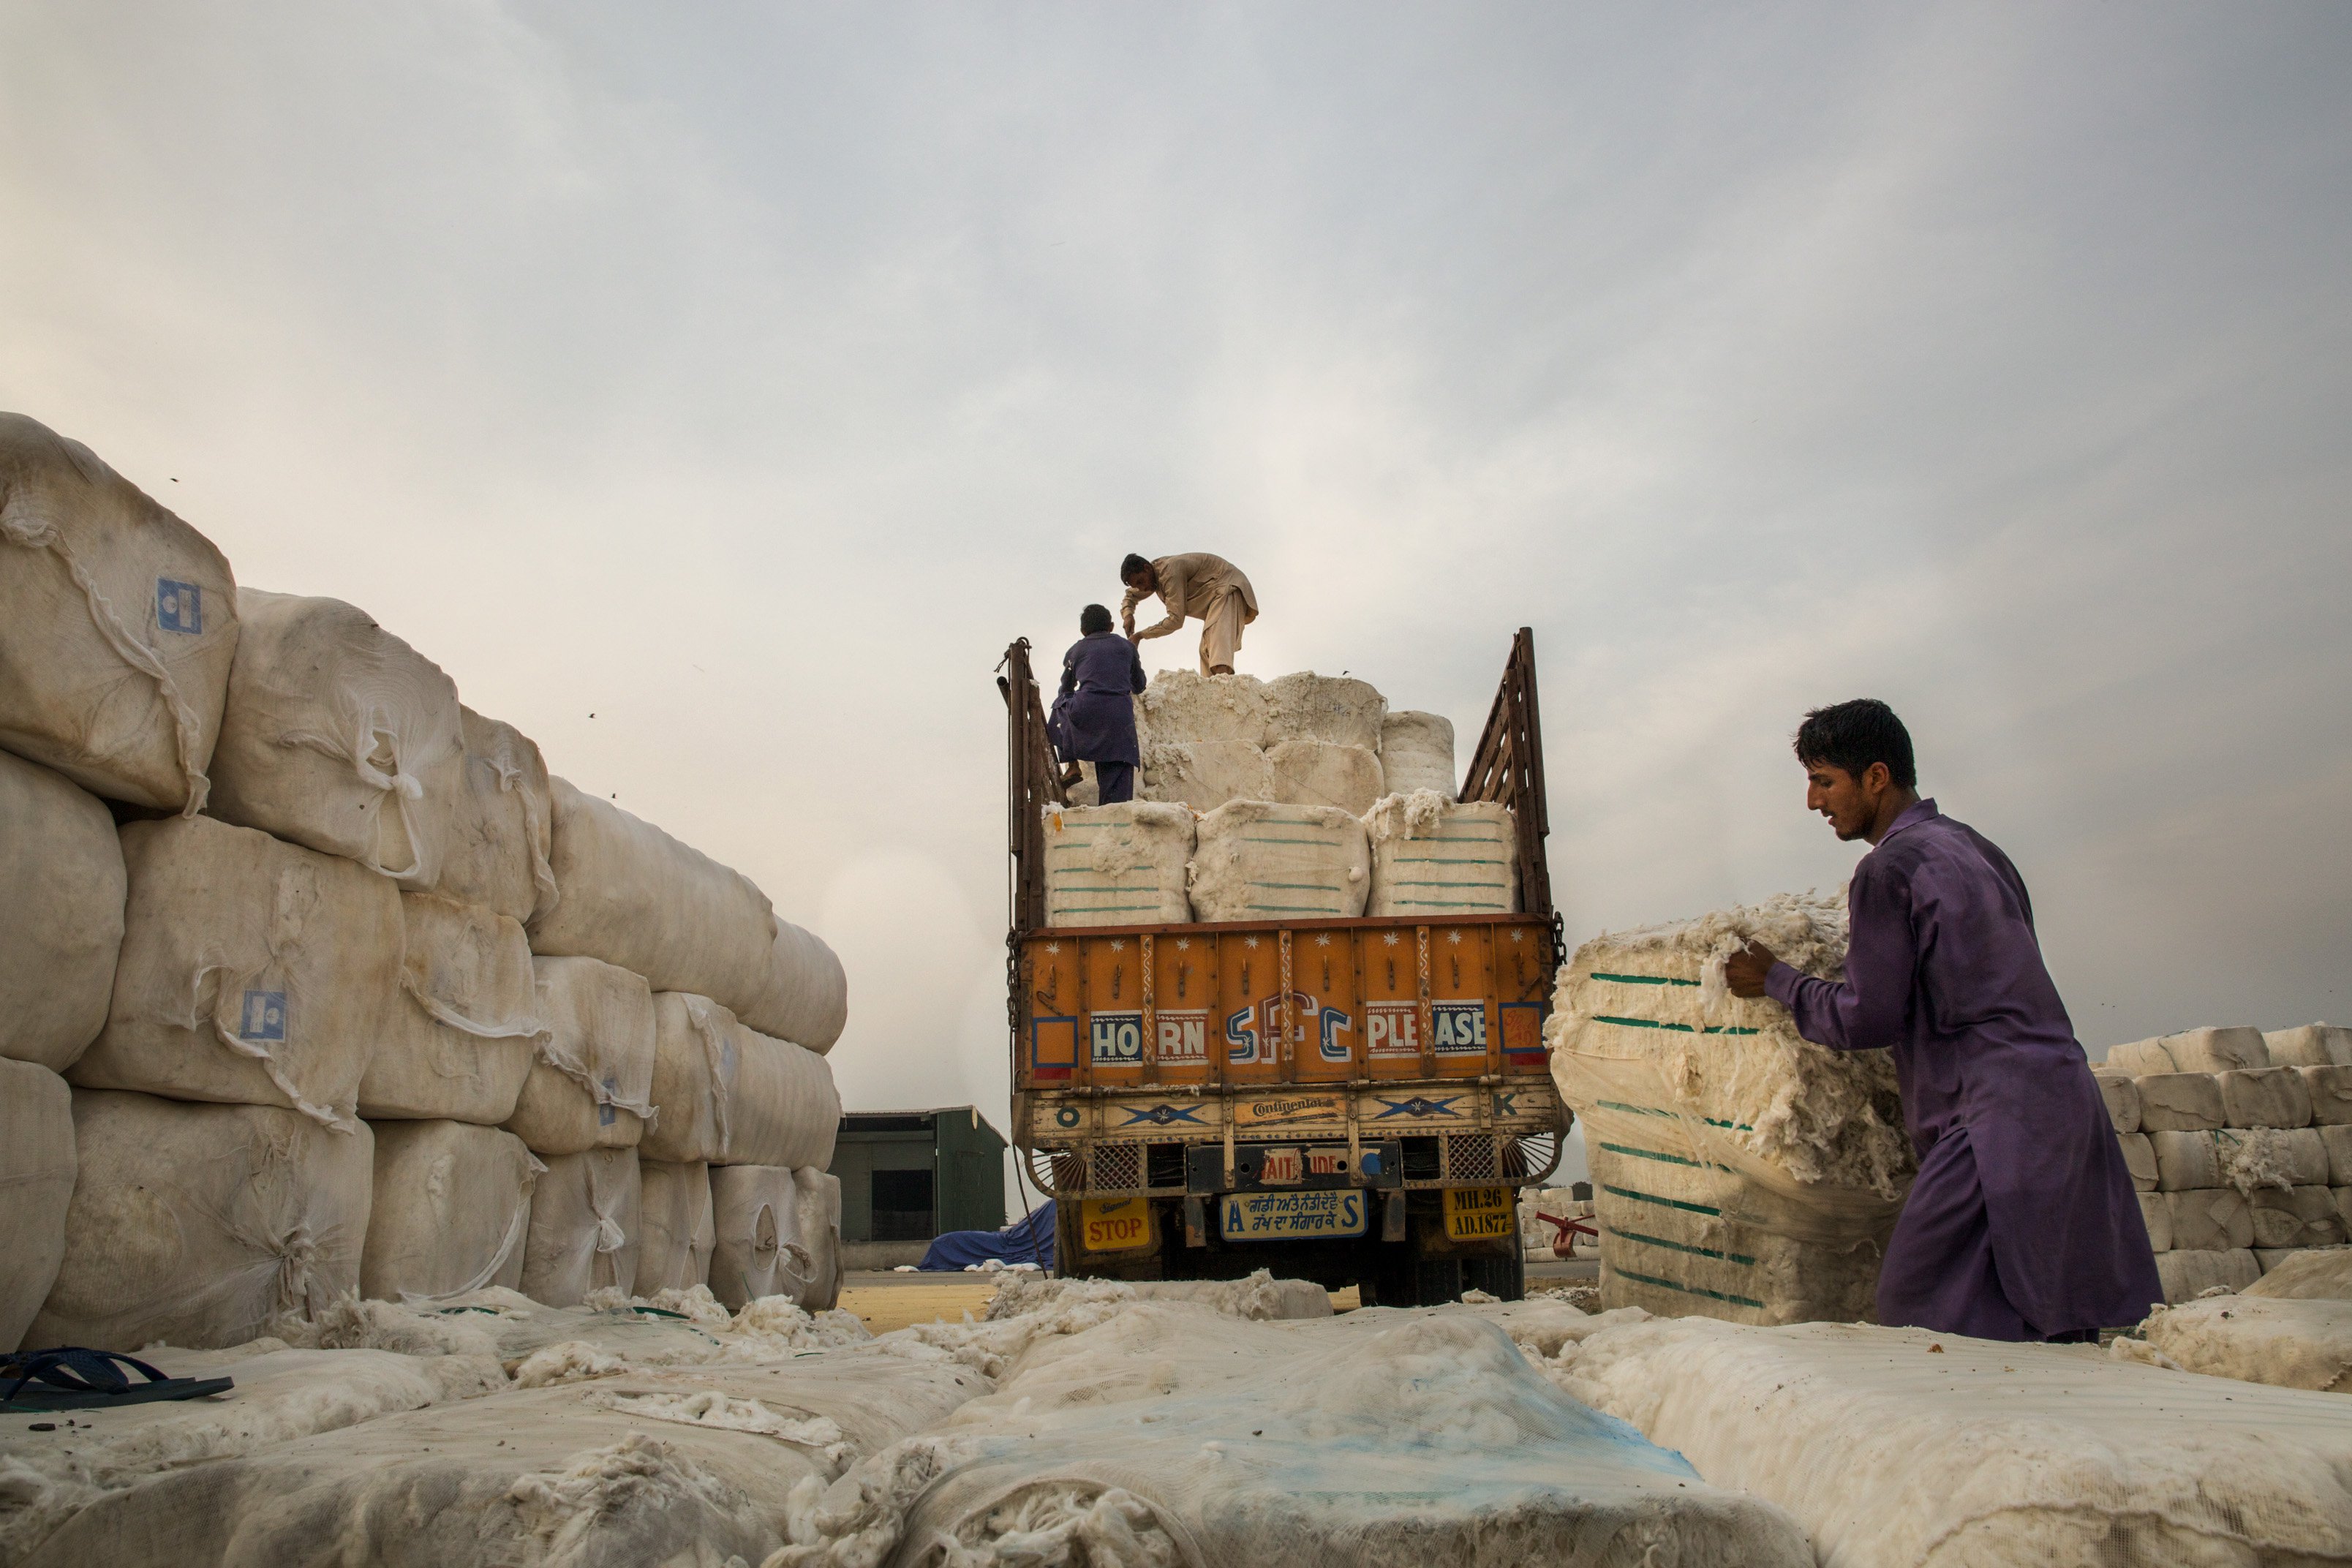 An Indian truck carrying cotton bales is being offloaded by the Pakistani workers at the Wagah-Attari Cargo Terminal